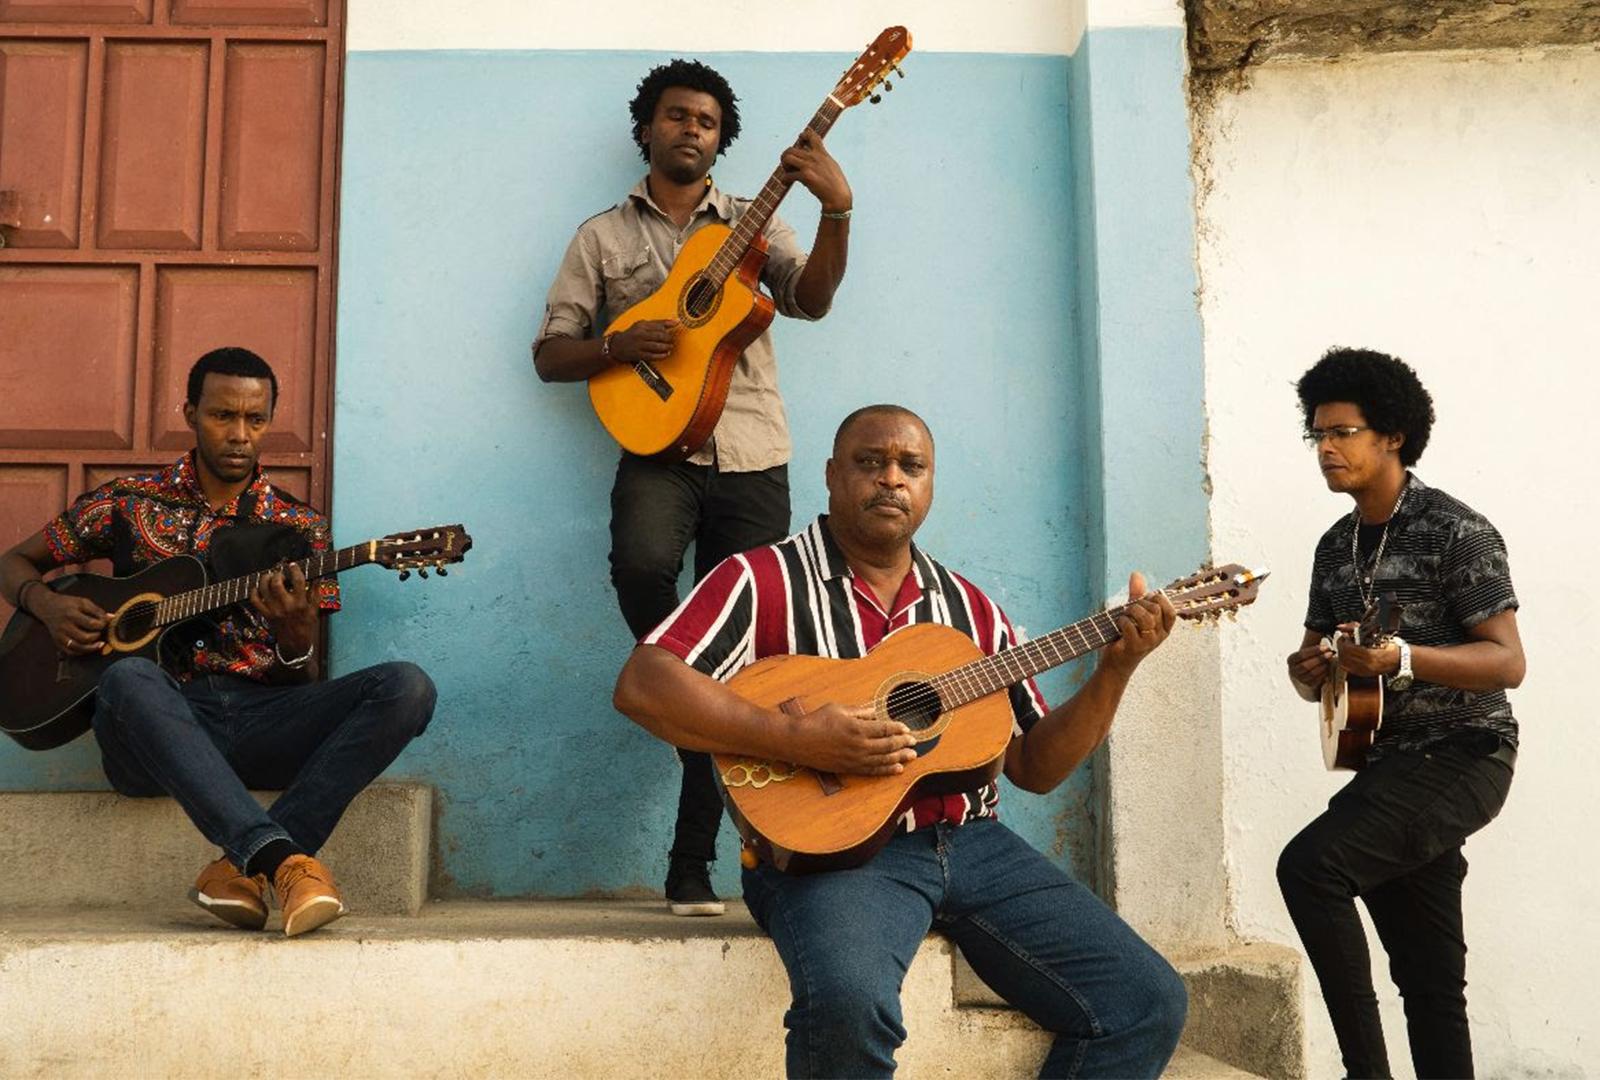 Ostinato launches acoustic series with new album by Cape Verde group, The Ano Nobo Quartet